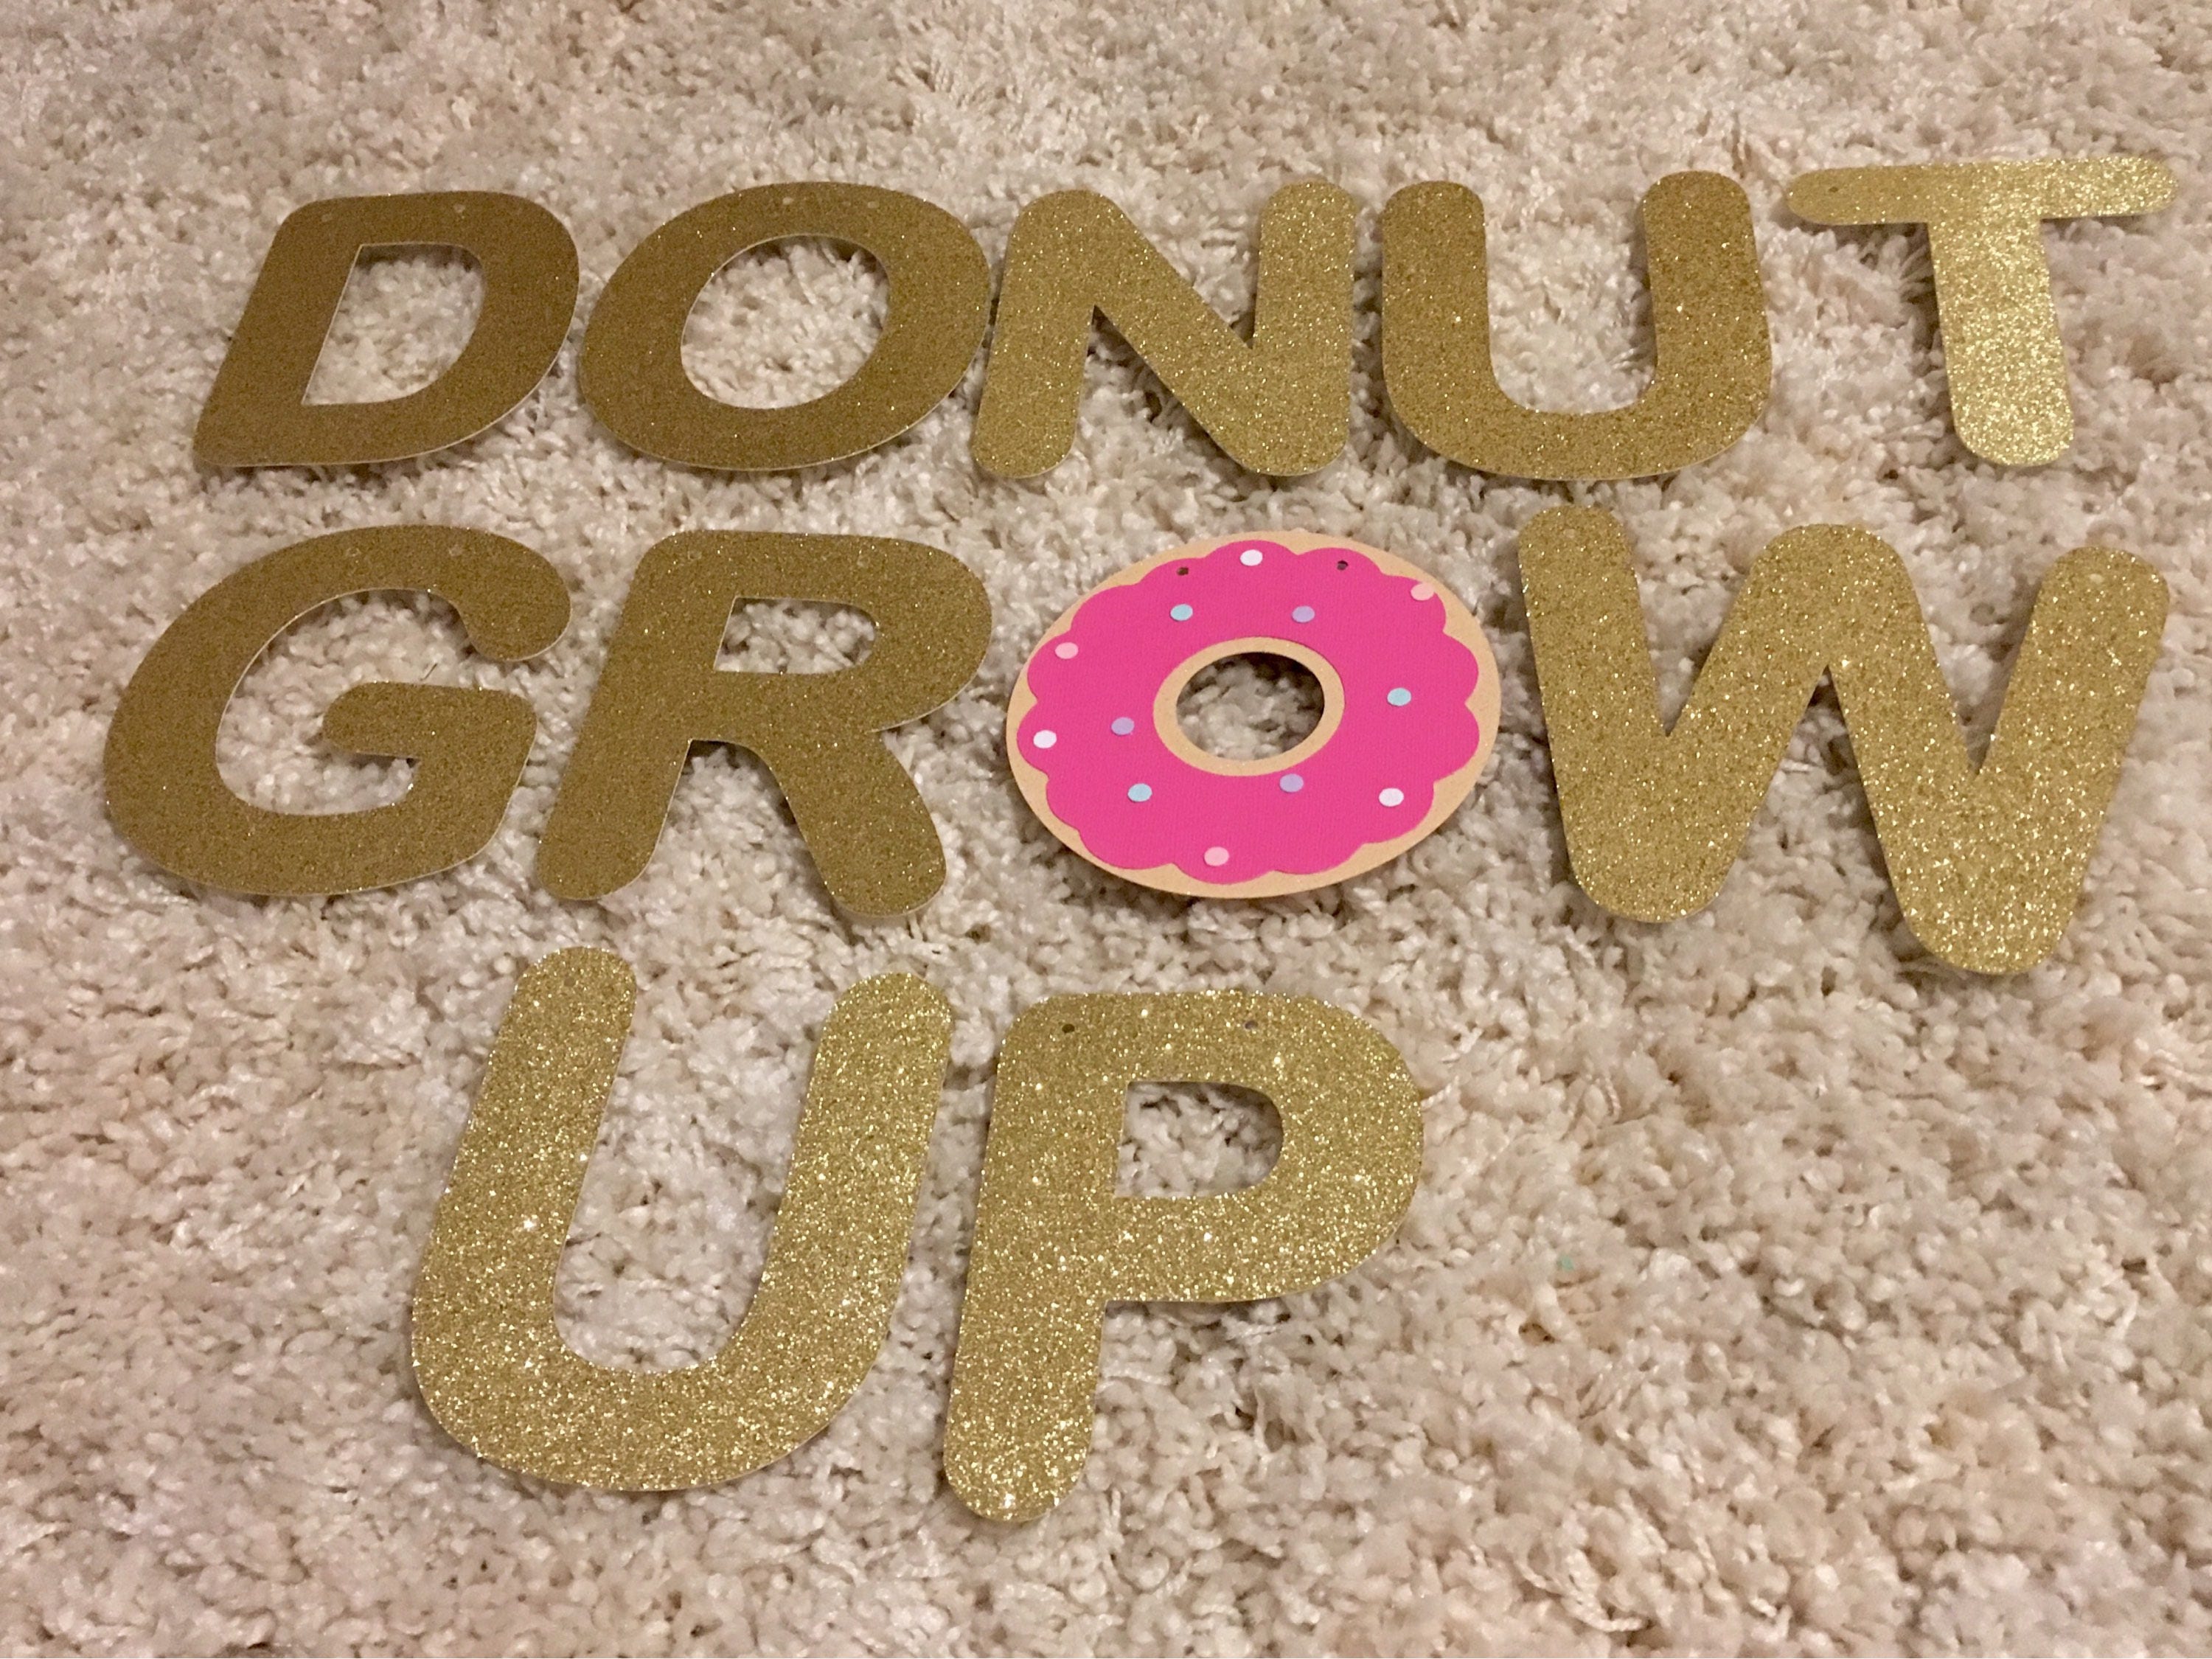 donut-high-chair-banner-donut-wall-banner-donut-one-banner-etsy-canada-candy-theme-birthday